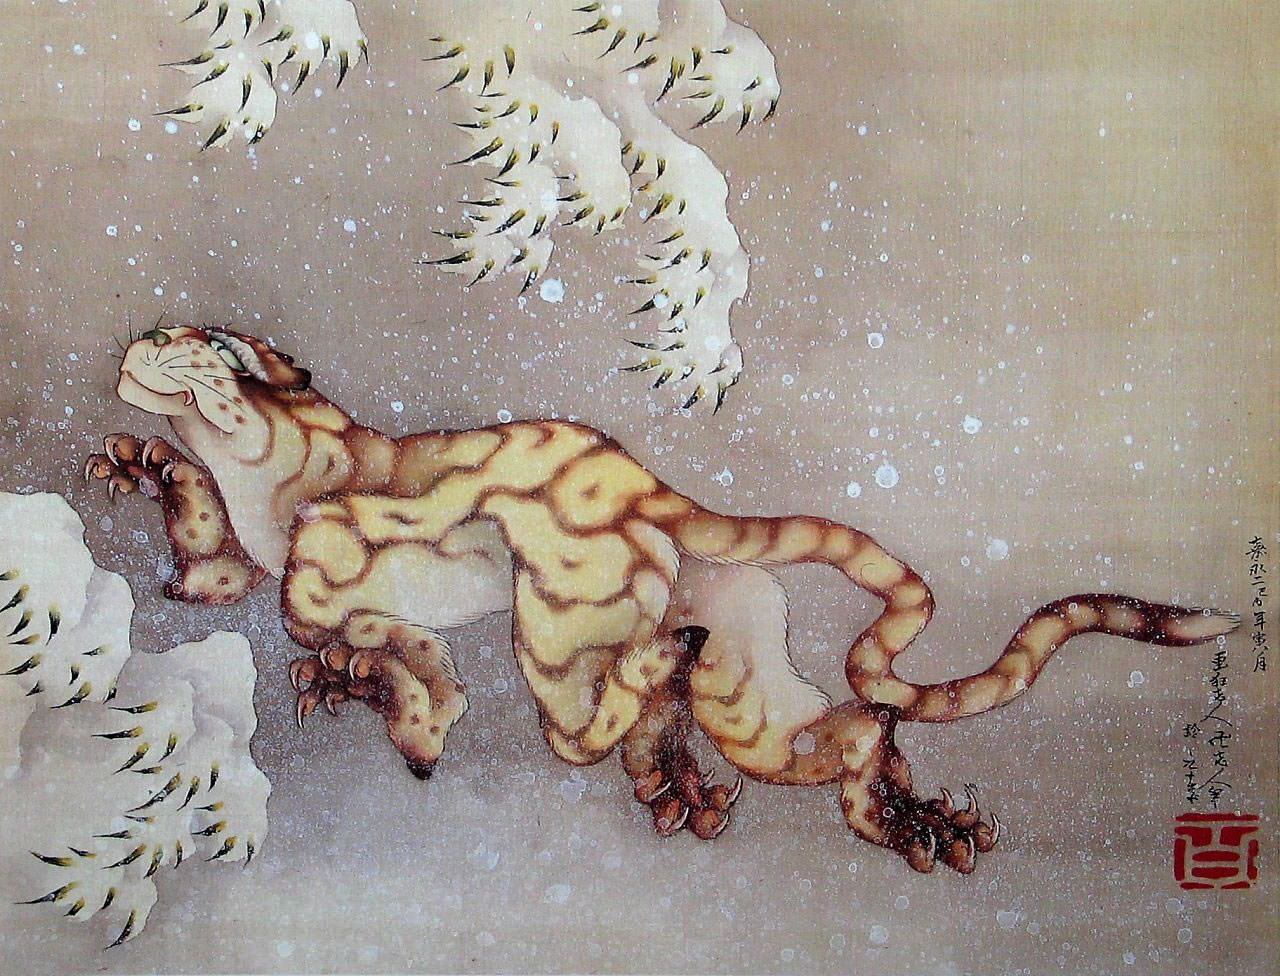 Tiger in the Snow by Katsushika Hokusai - 1849 private collection